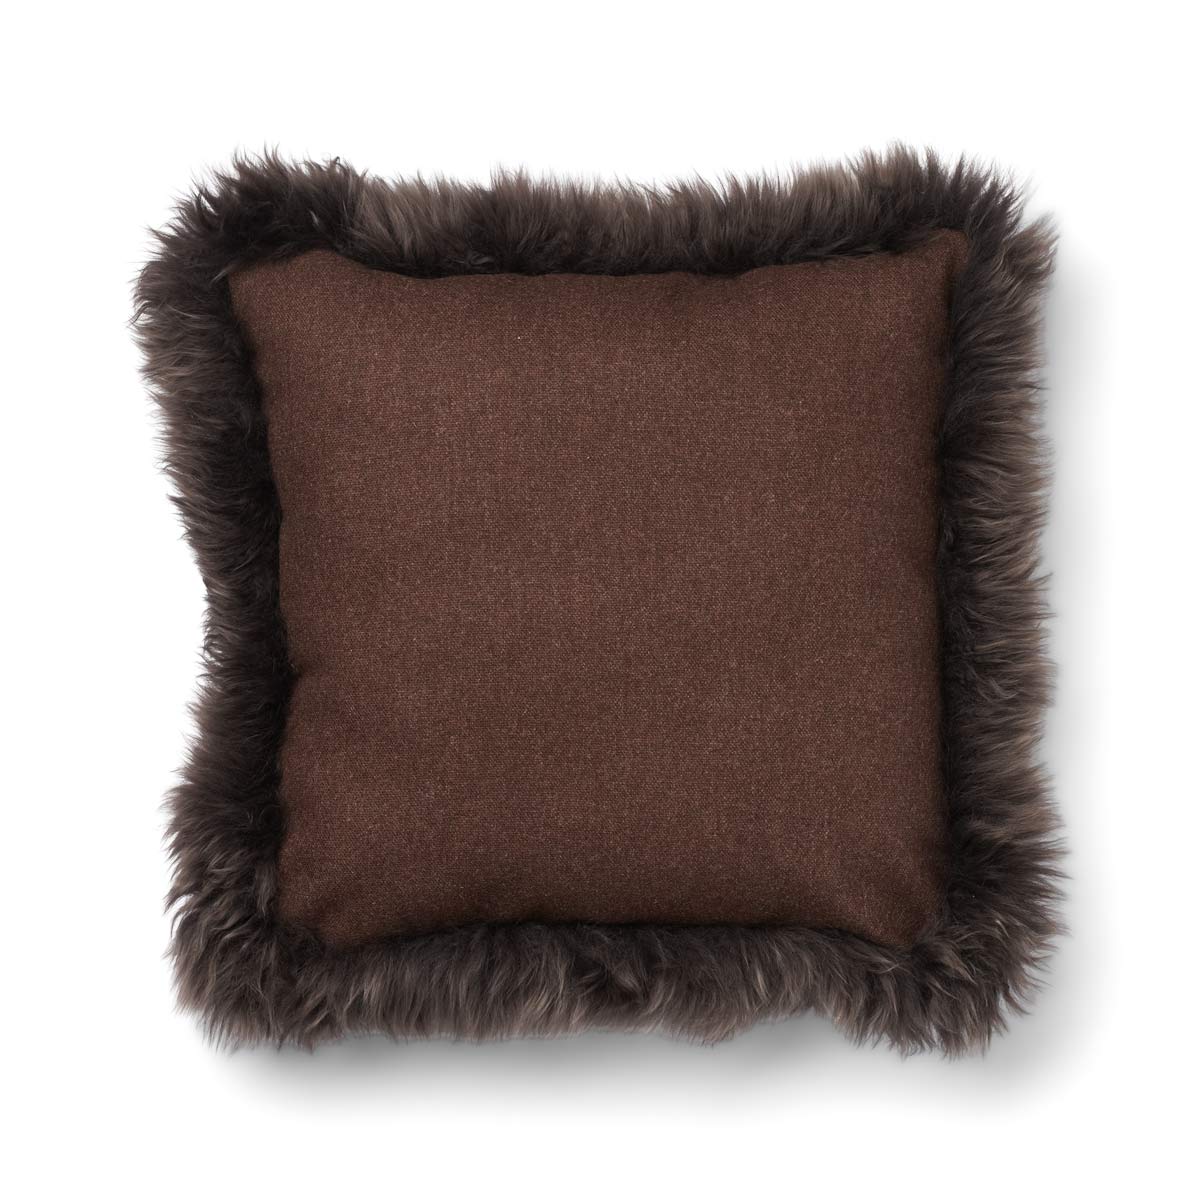 Classic Collection, Doublesided 100 % Wool Cushion and LW New Zealand Sheepskin Trimming Size: 52x52 cm